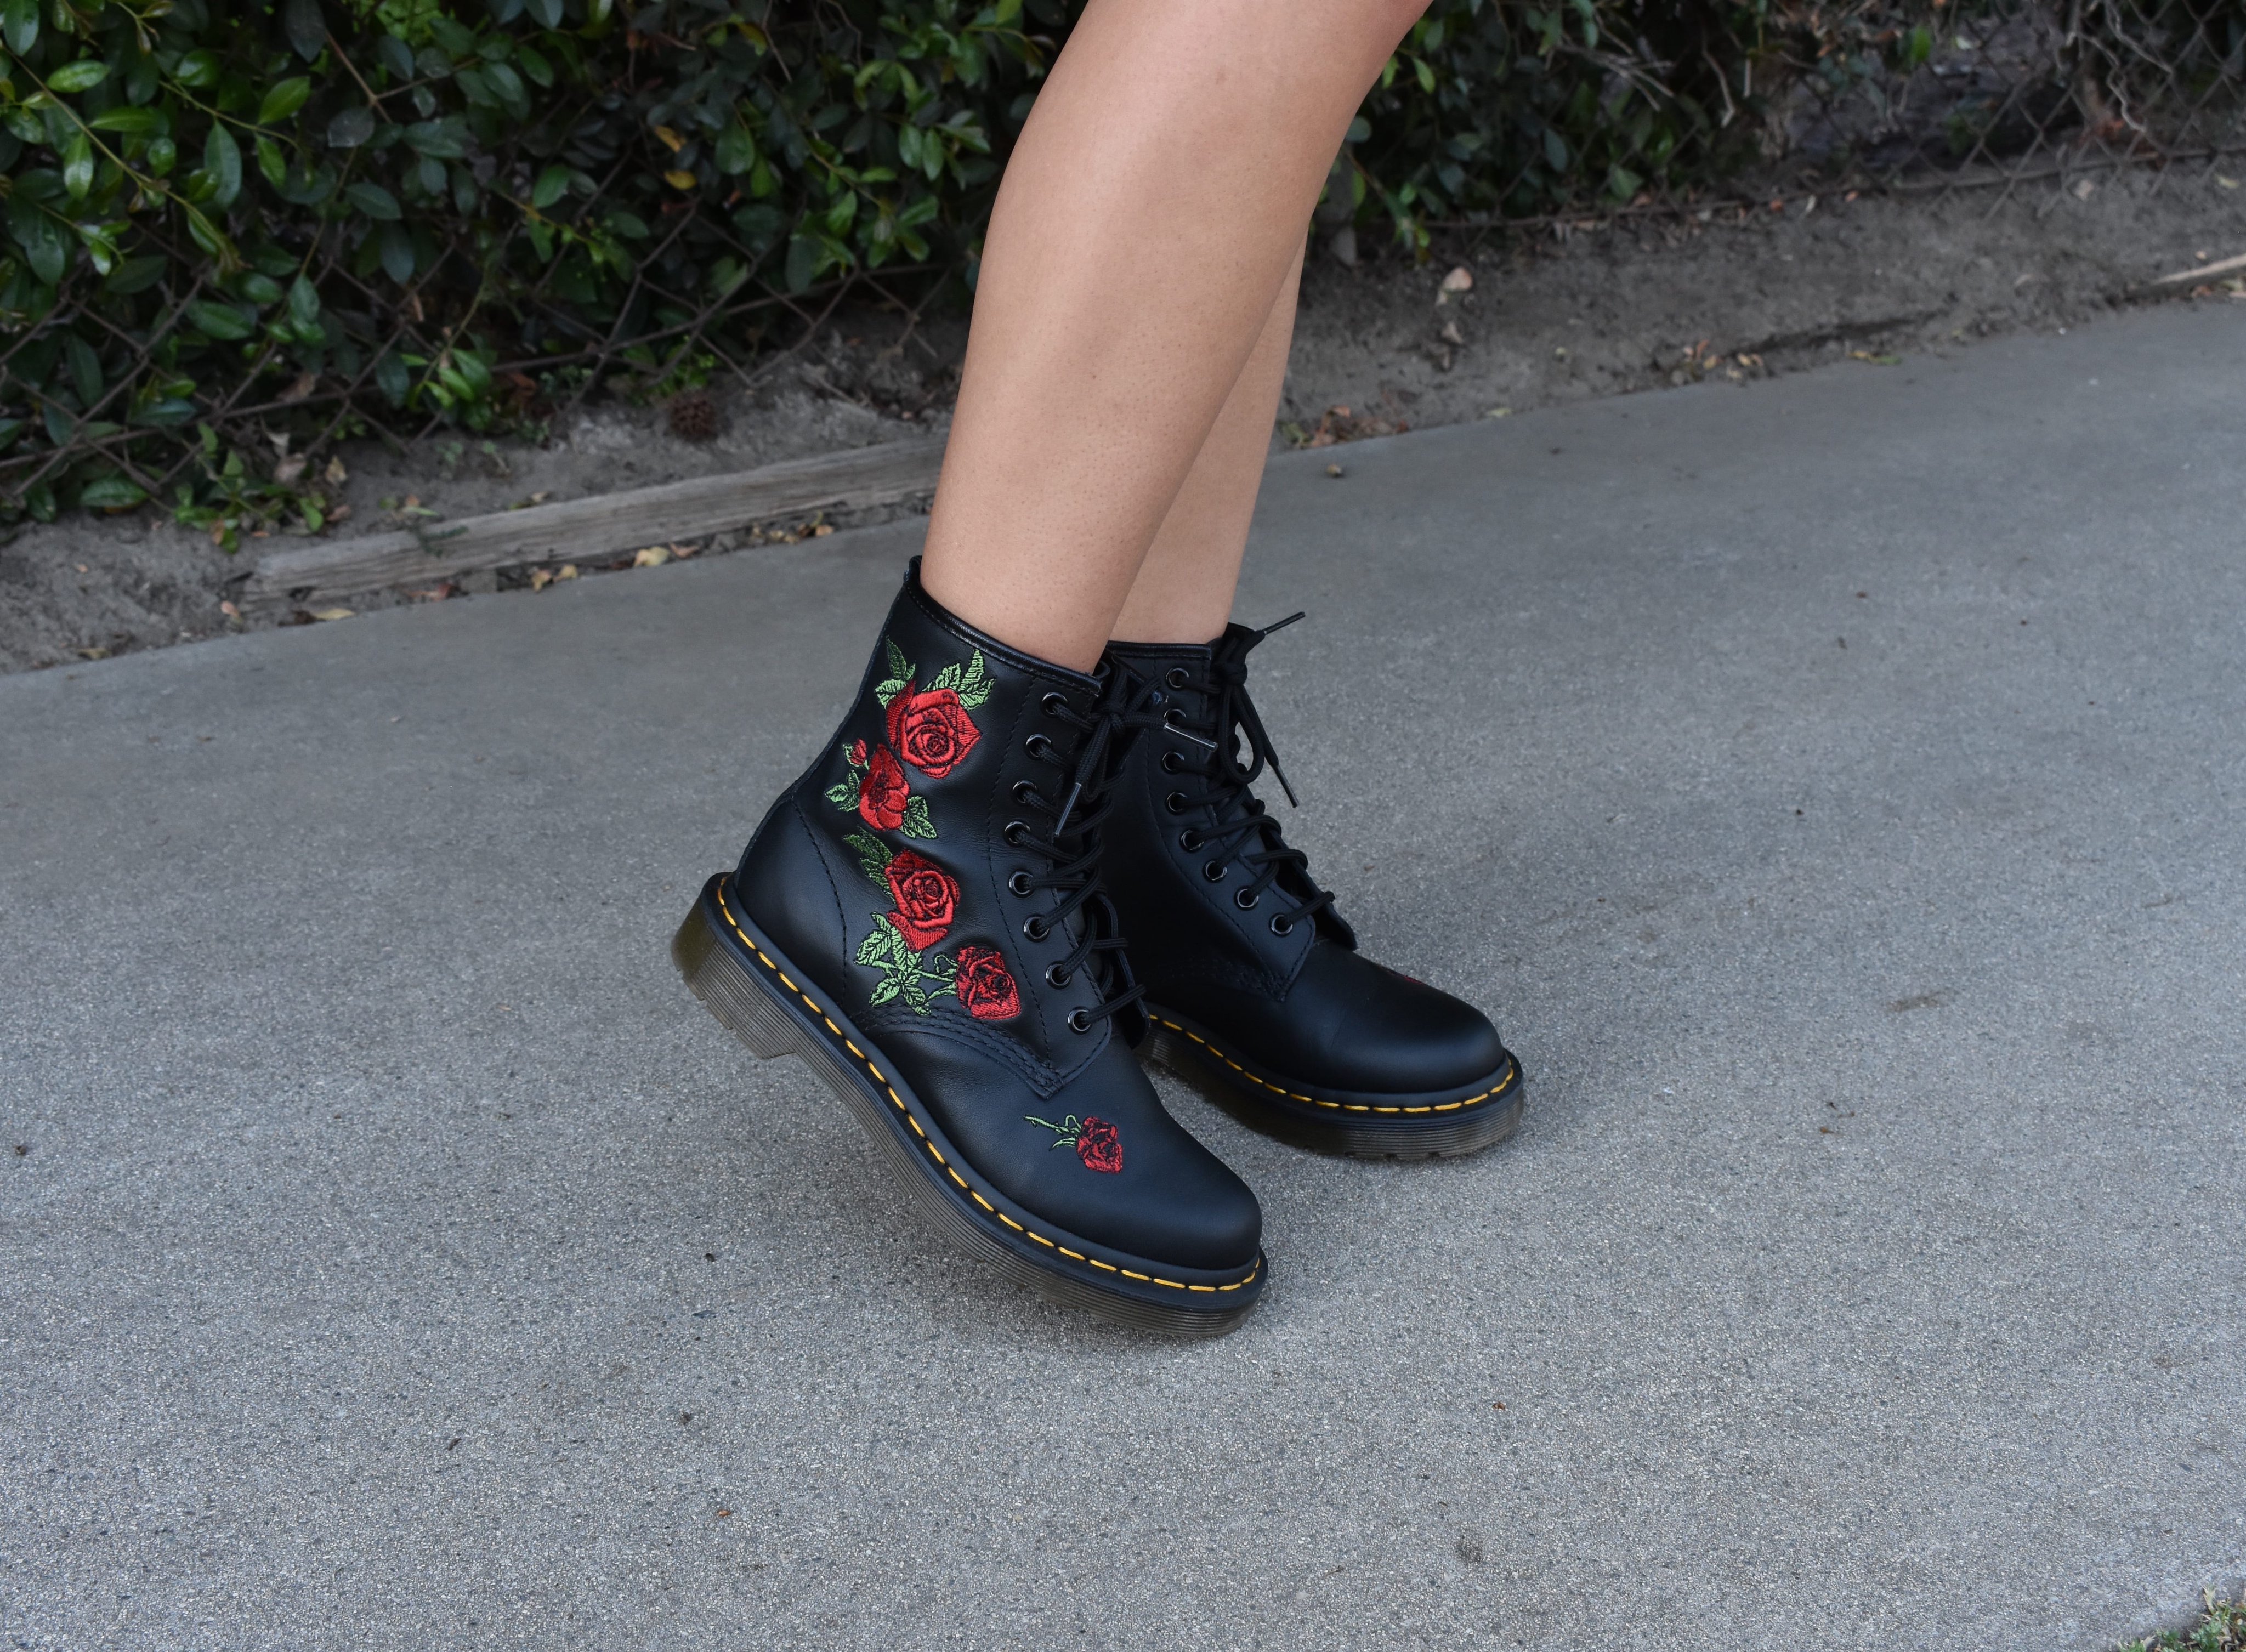 Pantano emergencia agenda Dr. Martens on Twitter: "Florals with all the attitude of our classic Docs  DNA. Where will you take your 1460 Vondas? Show us with #drmartensstyle.  EU: https://t.co/eeIrTUdqRq US &amp; INTL: https://t.co/kWVgqKHqmY  https://t.co/rG3FgHTKzD" /